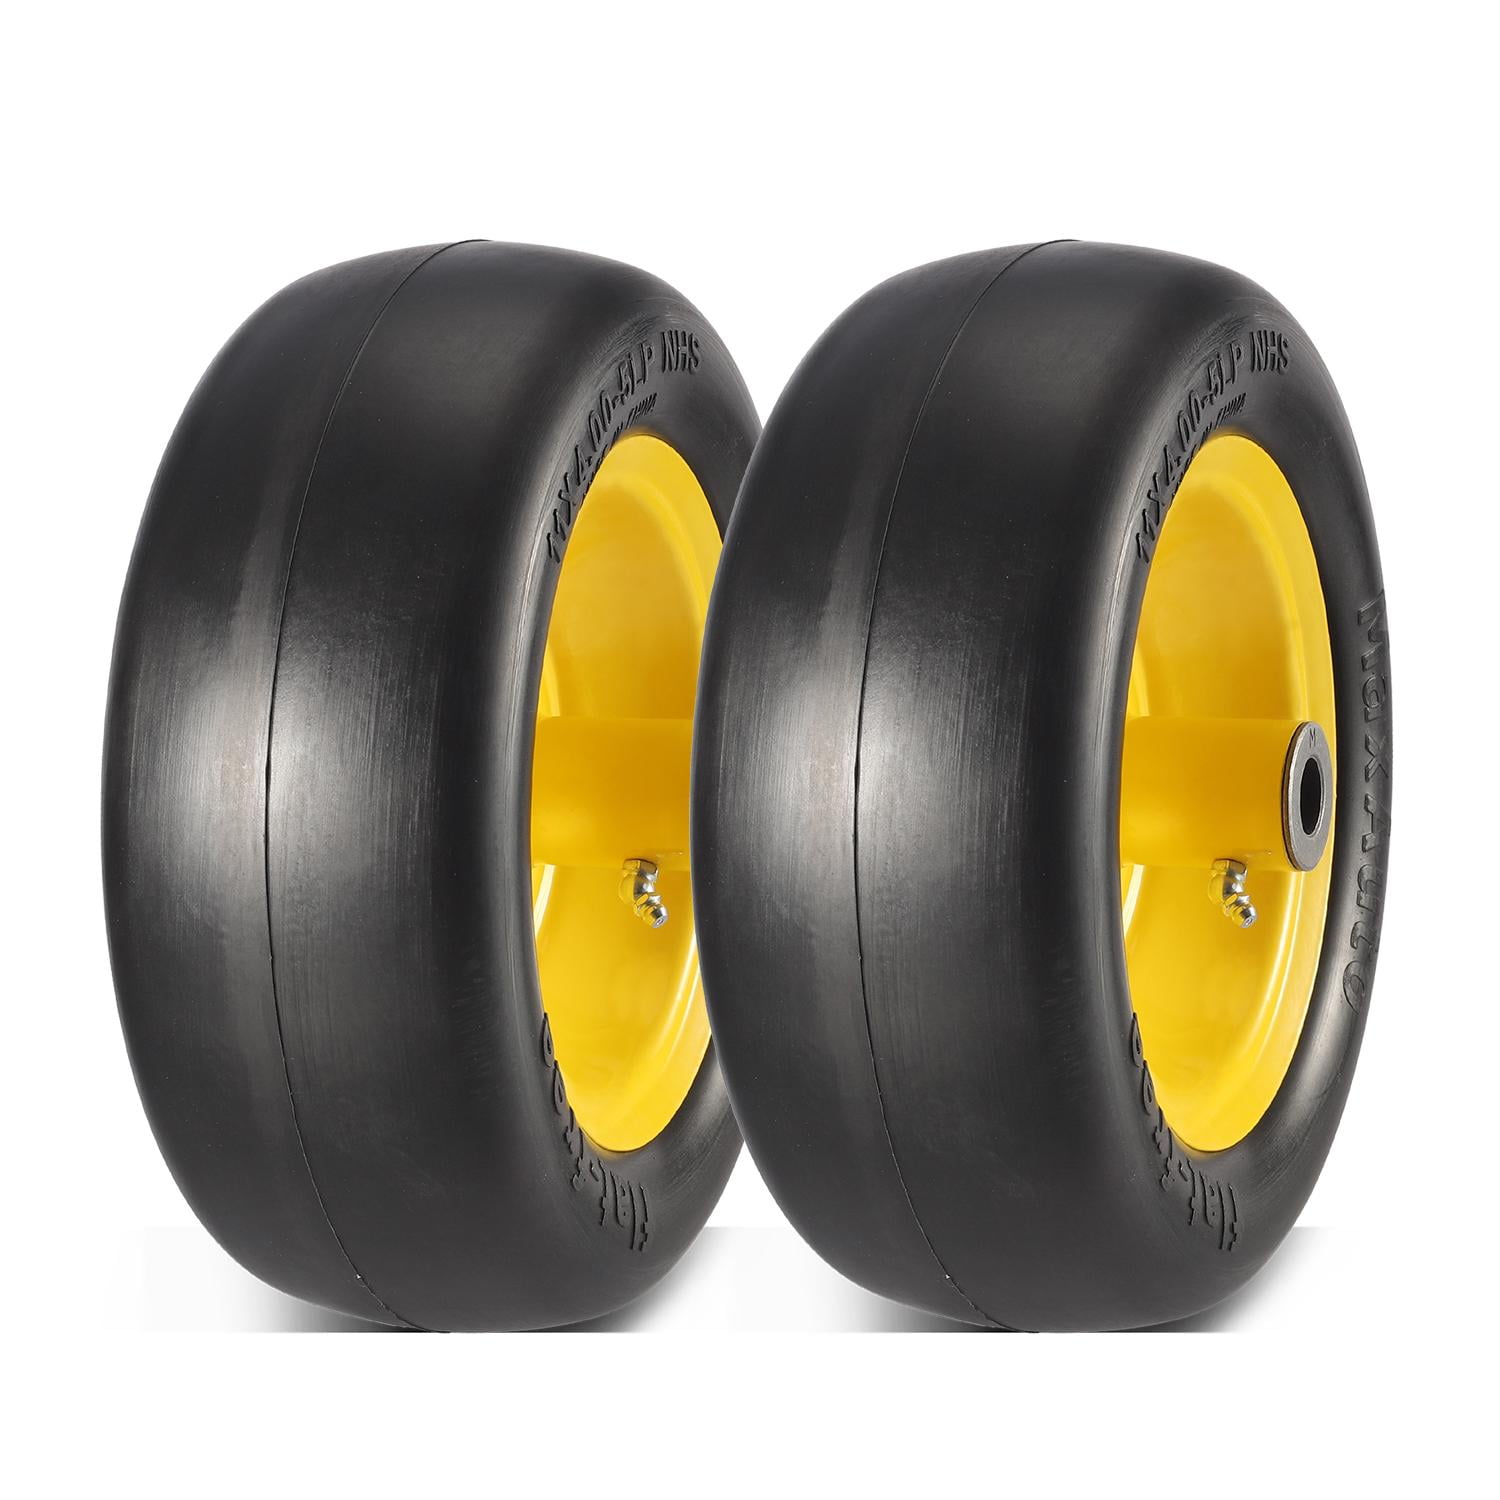 New 13x5.00-6 Flat-Free Lawn Mower Smooth Tires with Steel Rim 2-Pcs-Set 